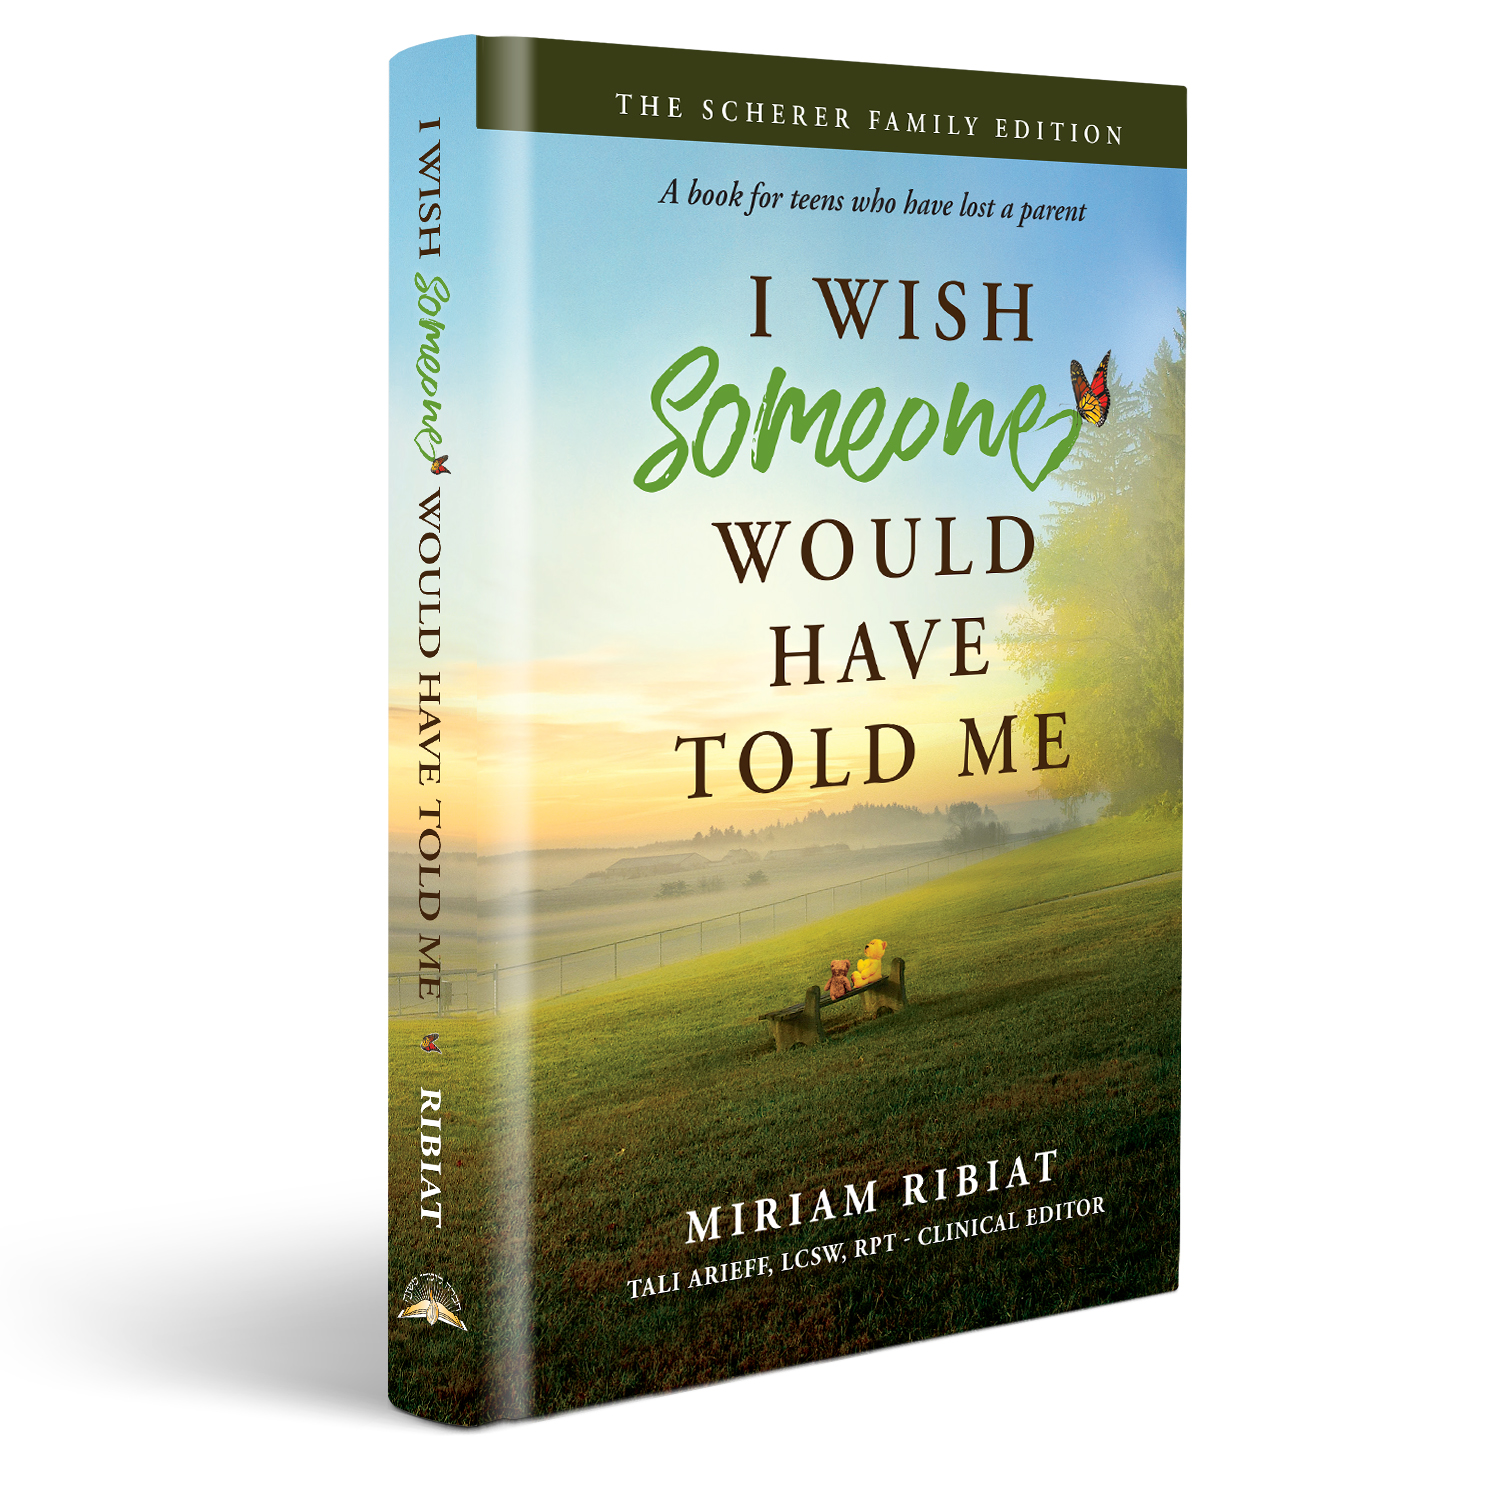 In this article, Miriam Ribiat, author of the teen book I Wish Someone Would Have Told Me, talks about how she came to write the book.